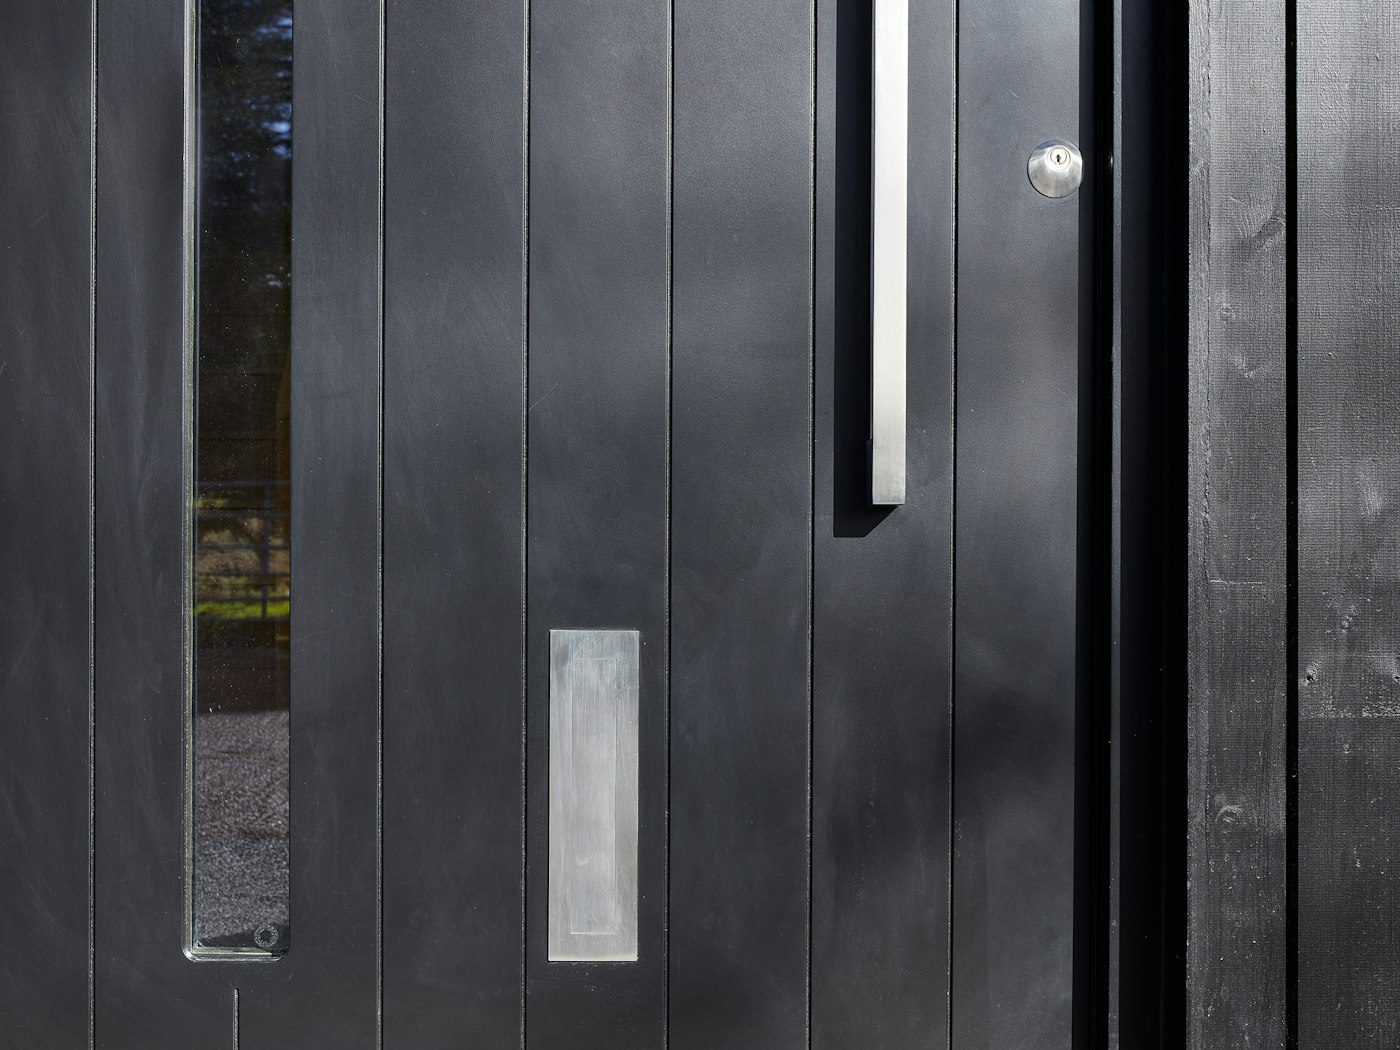 This black door design blends seamlessly into the vertical black cladding 